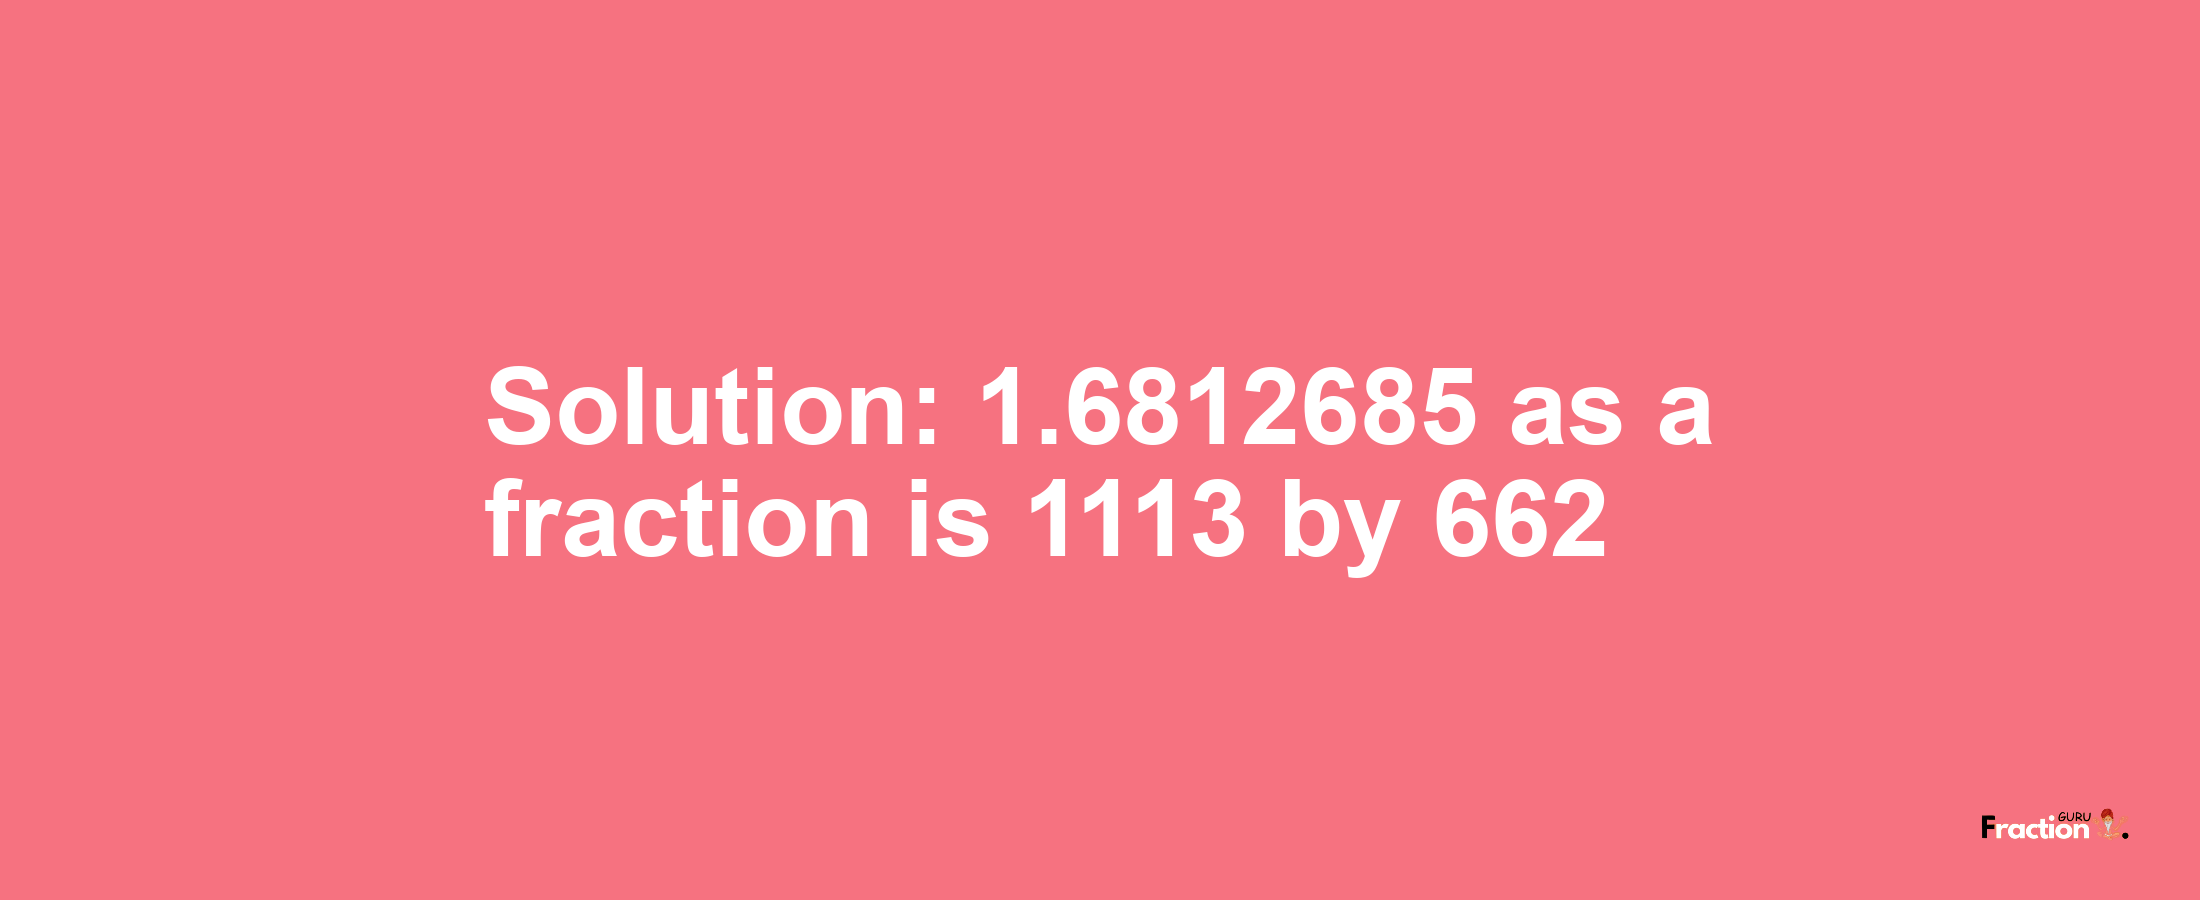 Solution:1.6812685 as a fraction is 1113/662